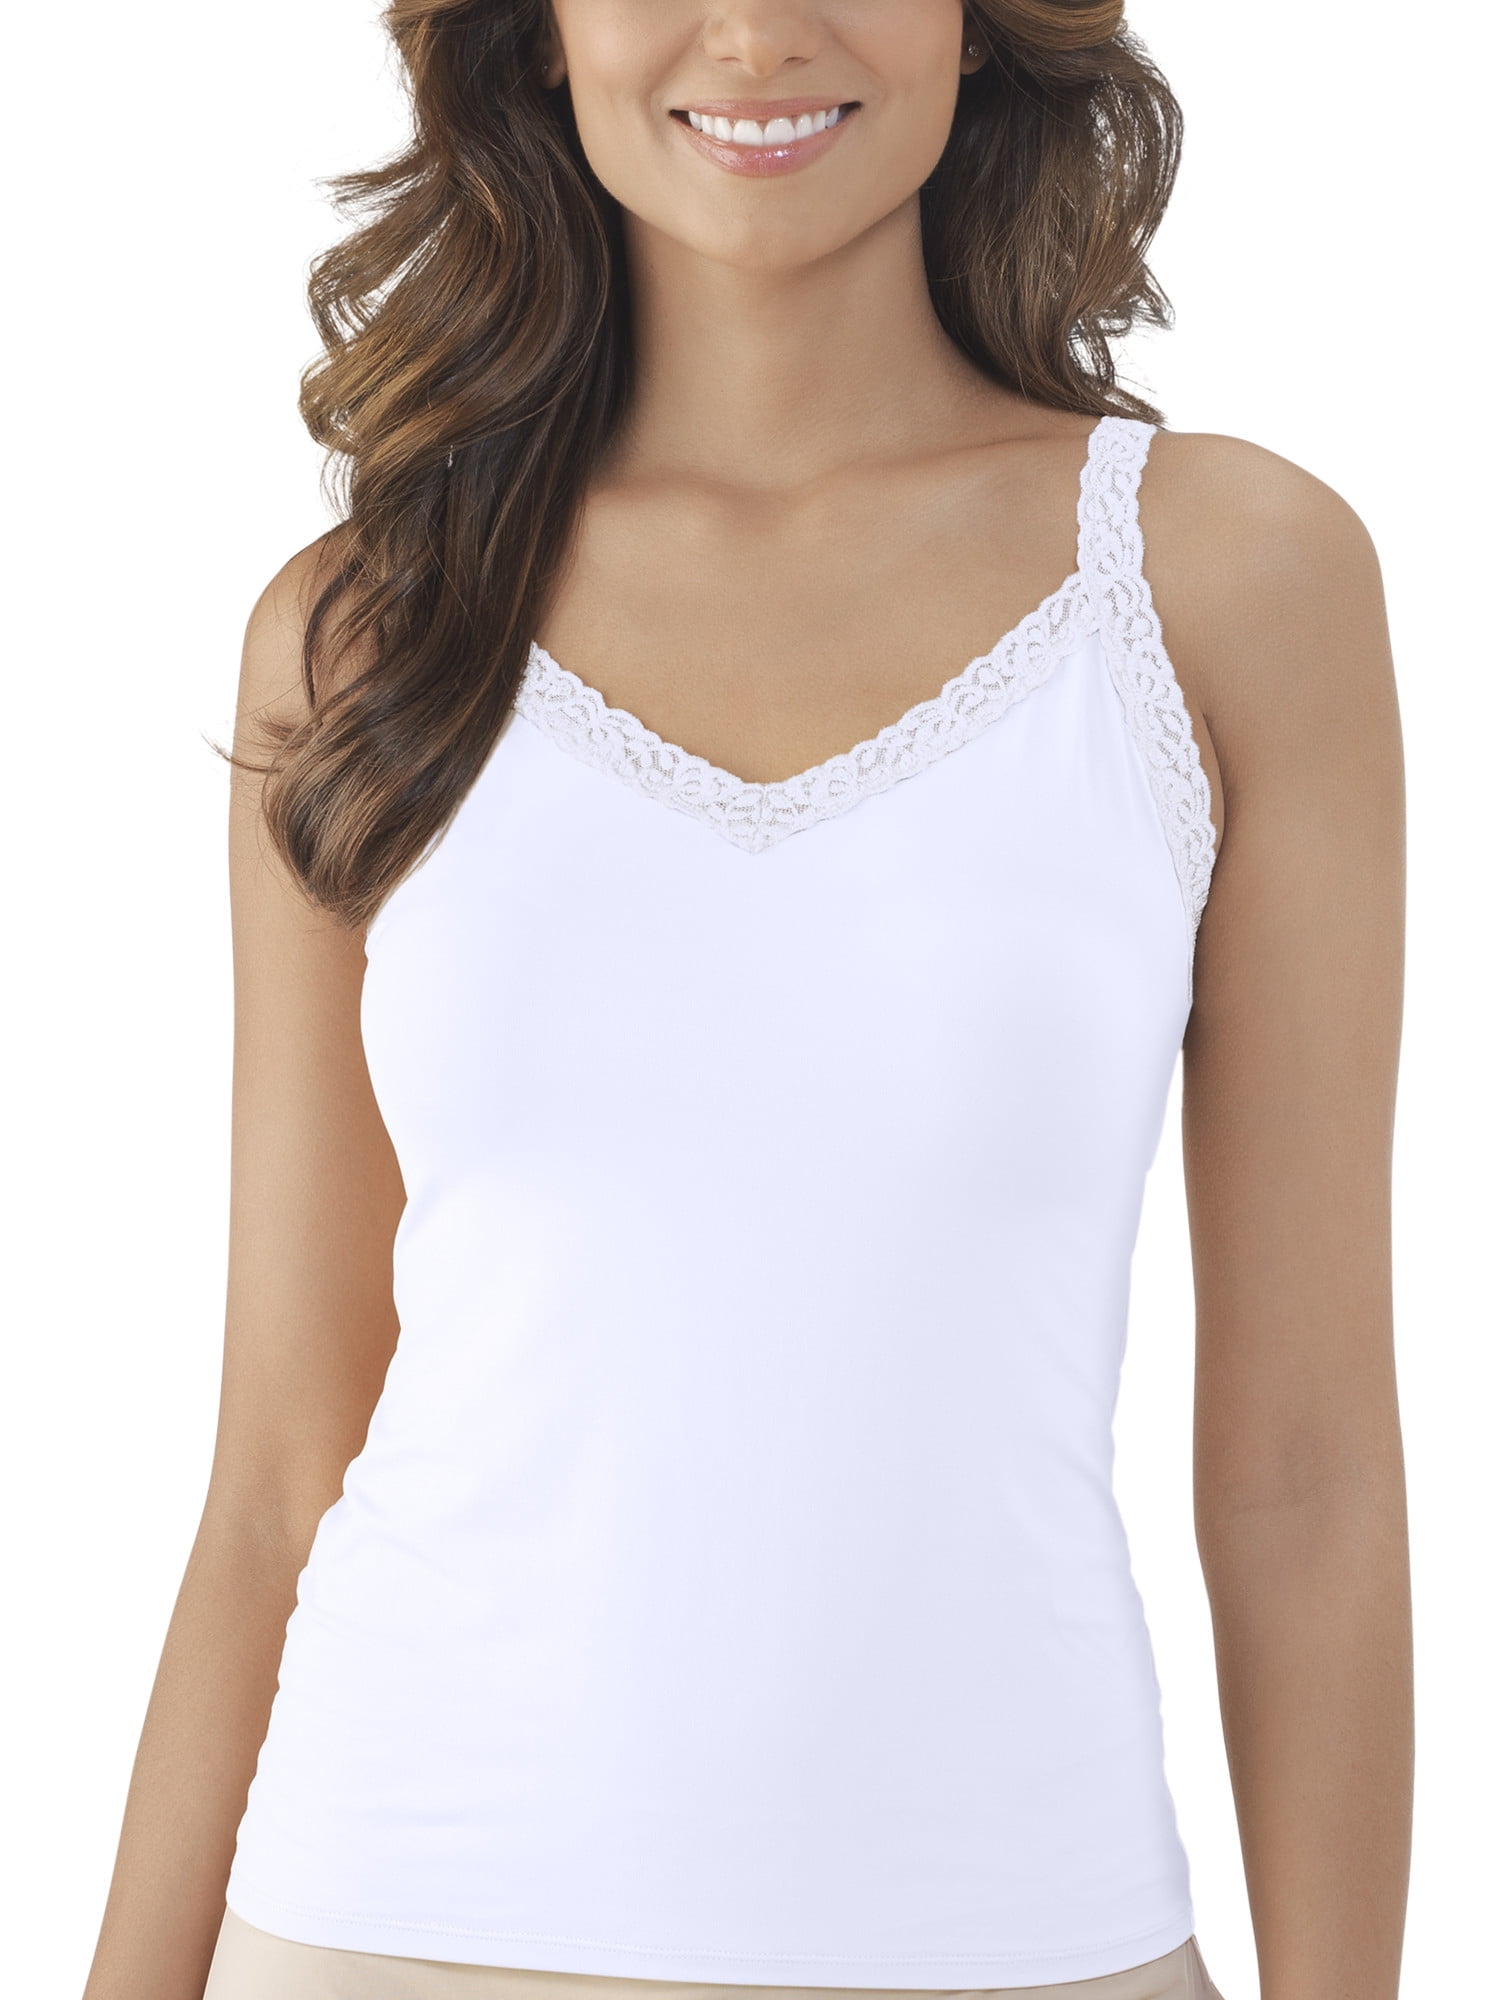 Vanity Fair Radiant Collection Women's Smooth Breathable Spin Tank 